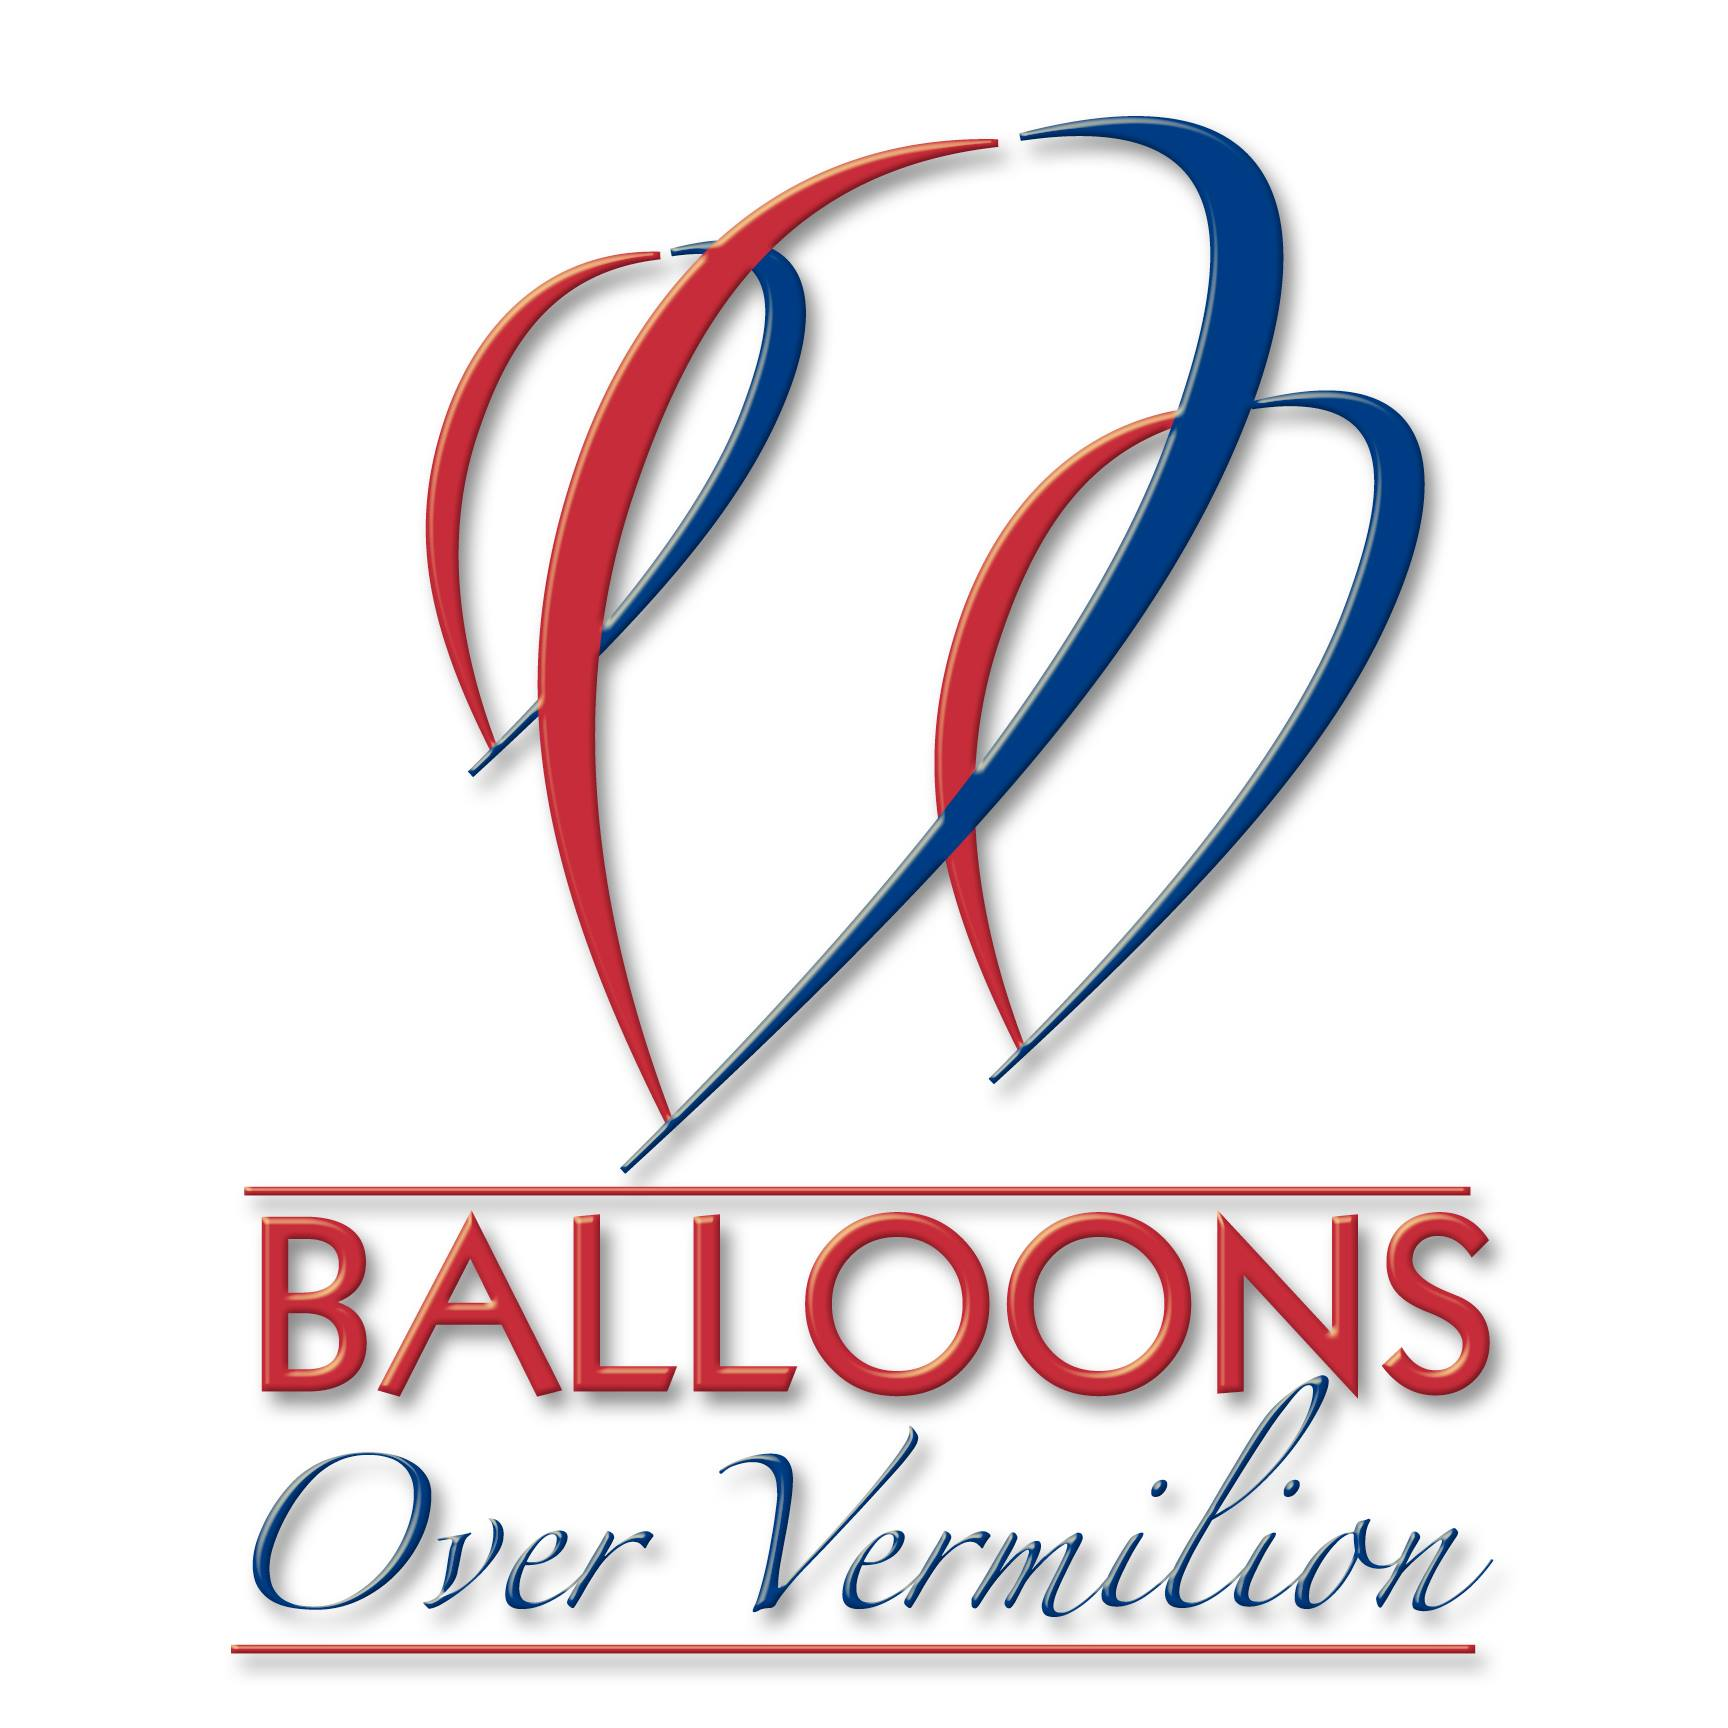 The Community Connection April 30th - Balloons Over Vermilion